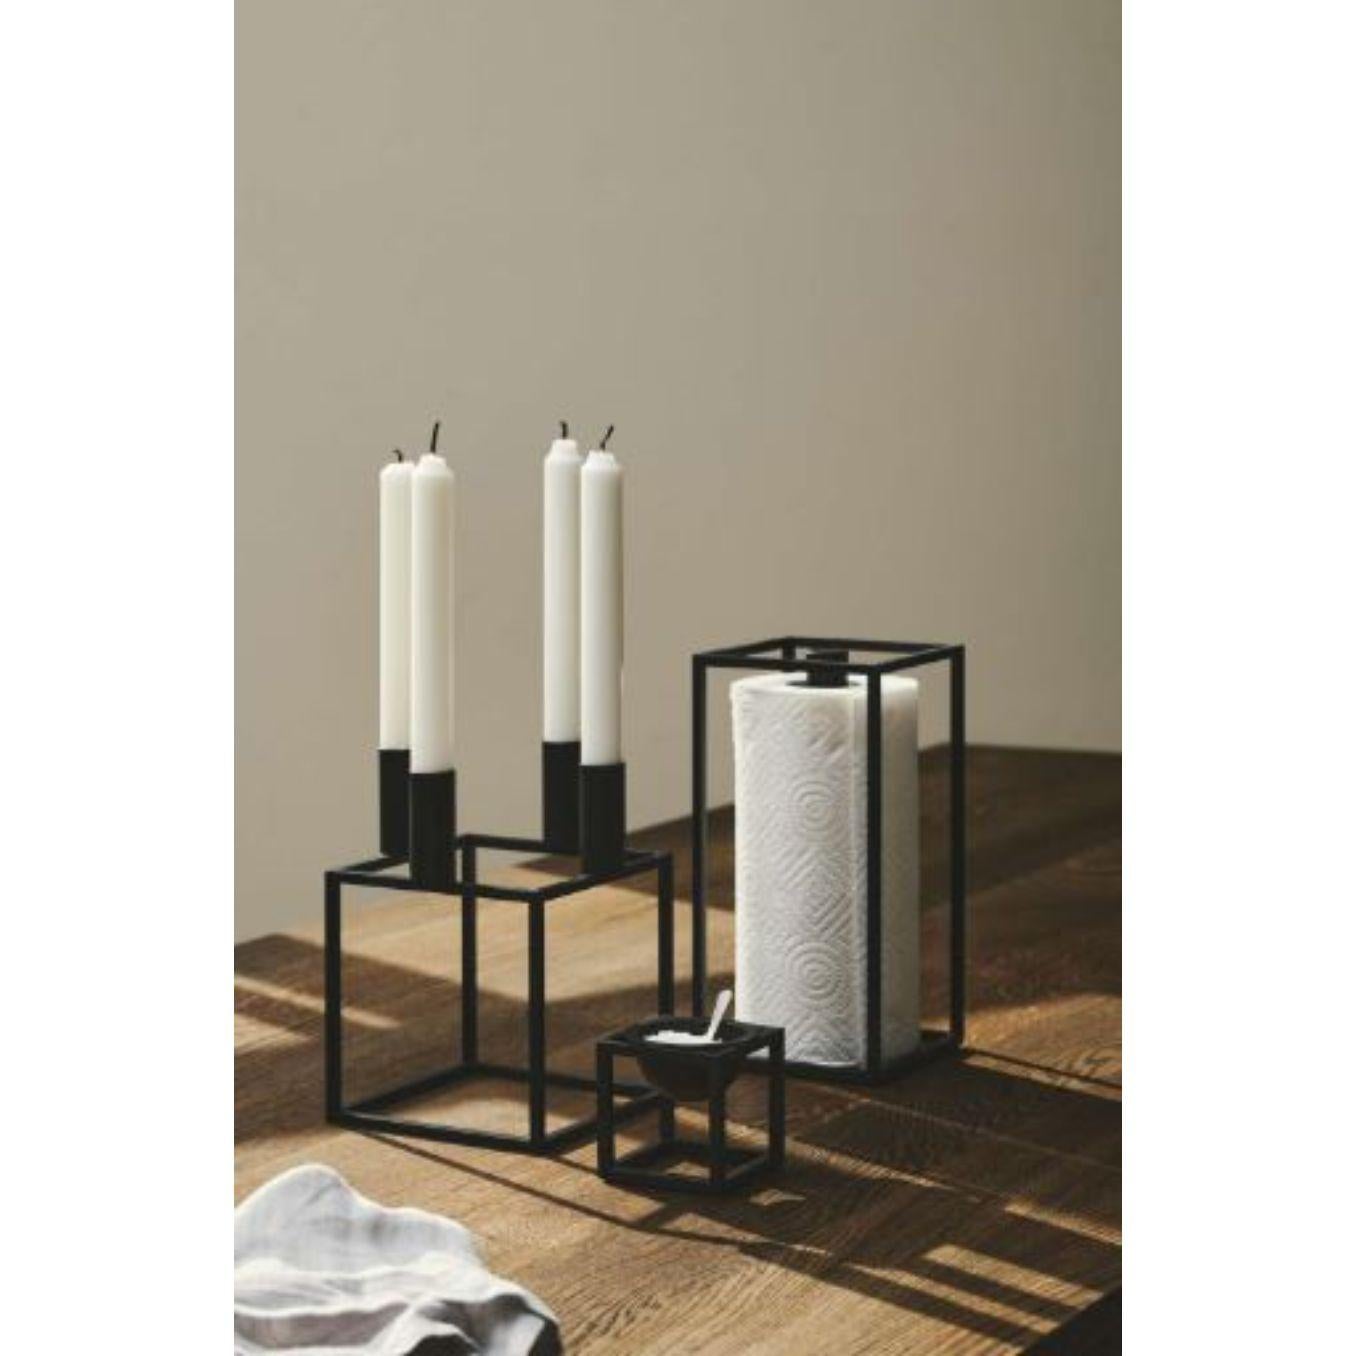 Contemporary Nickel Plated Kubus 4 Candle Holder by Lassen